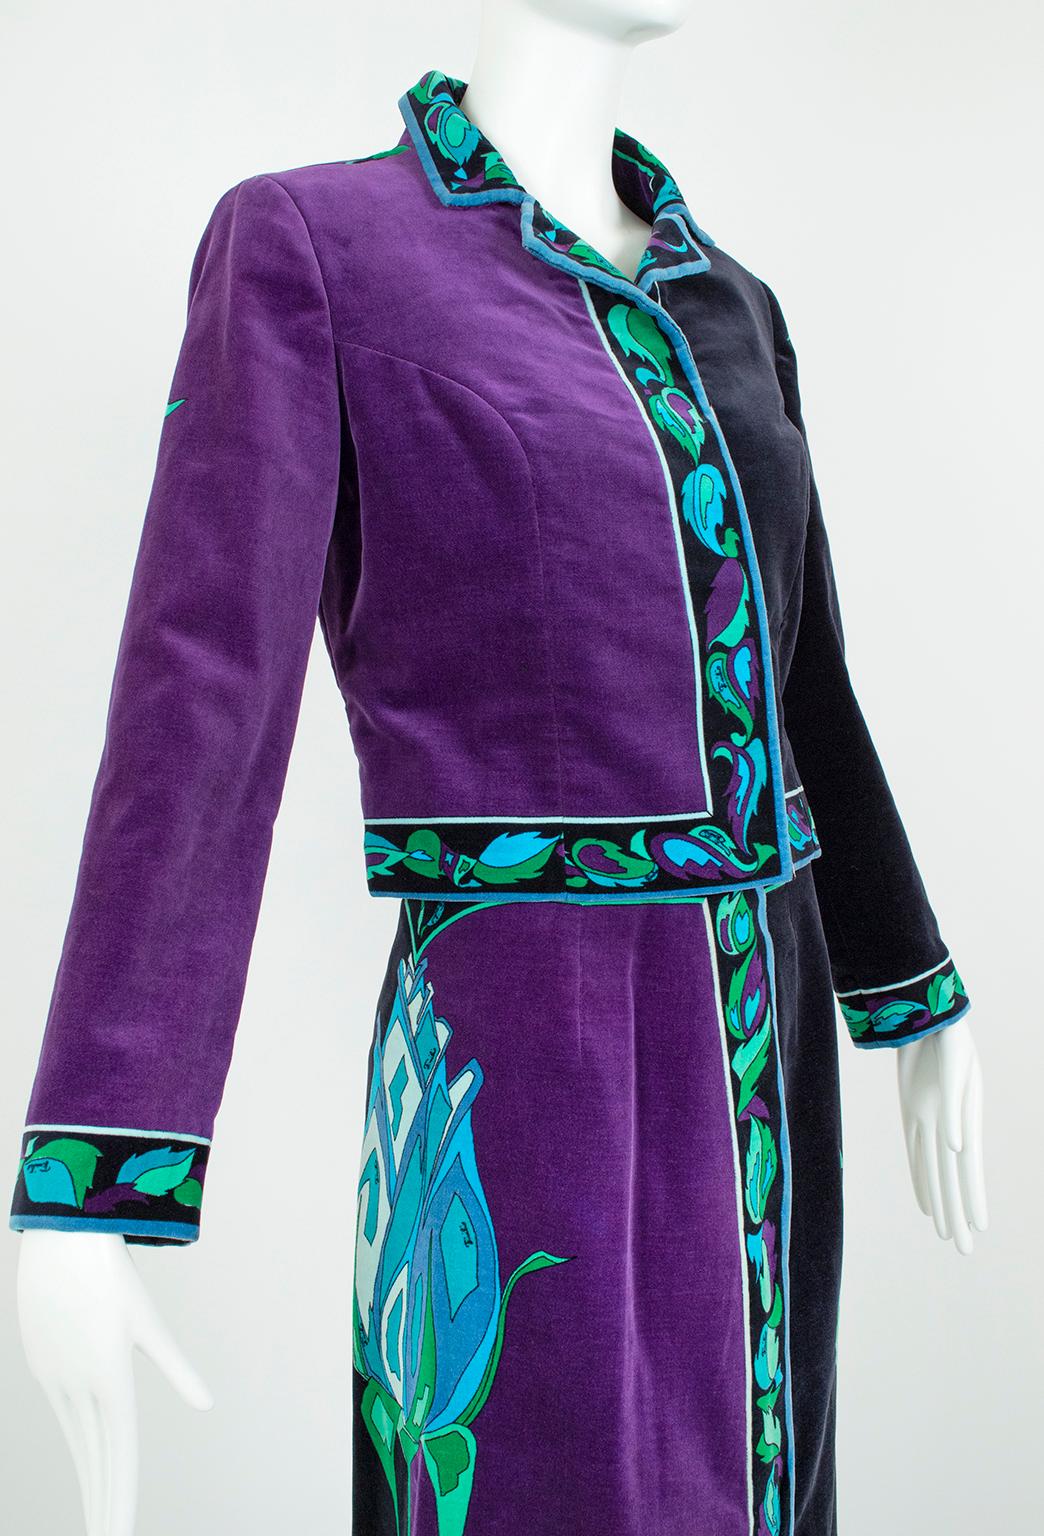 Emilio Pucci Black and Purple Rose Velvet Jacket and Maxi Skirt, Saks – S, 1971 For Sale 2